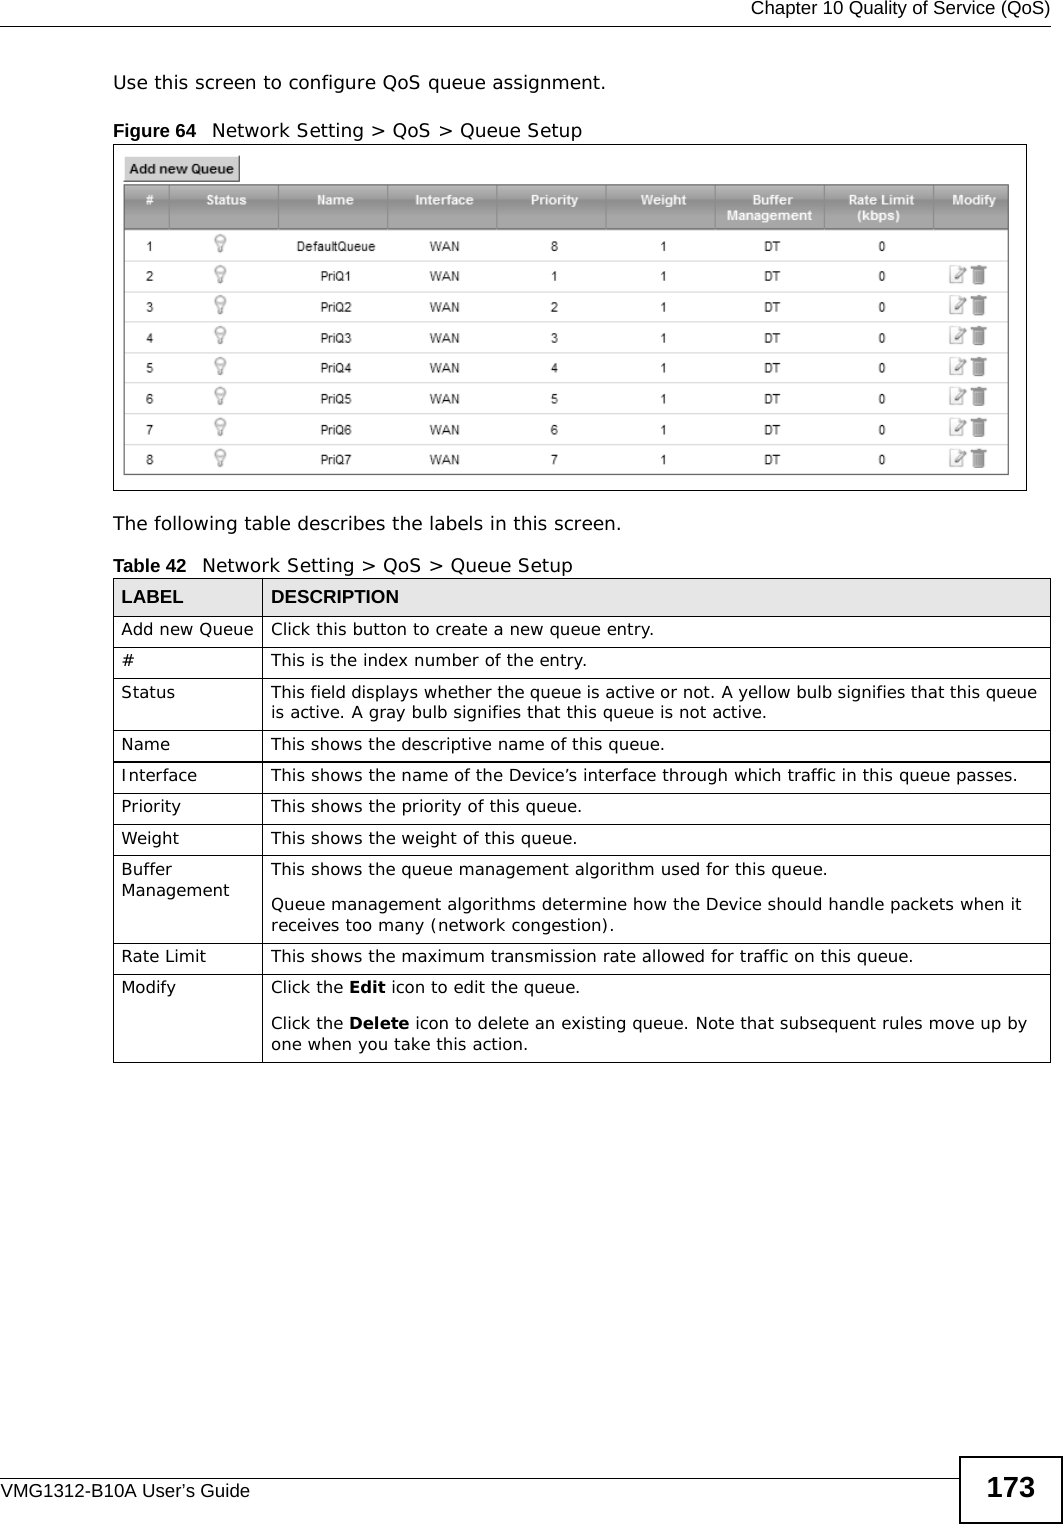  Chapter 10 Quality of Service (QoS)VMG1312-B10A User’s Guide 173Use this screen to configure QoS queue assignment. Figure 64   Network Setting &gt; QoS &gt; Queue Setup The following table describes the labels in this screen. Table 42   Network Setting &gt; QoS &gt; Queue SetupLABEL DESCRIPTIONAdd new Queue Click this button to create a new queue entry.#This is the index number of the entry.Status This field displays whether the queue is active or not. A yellow bulb signifies that this queue is active. A gray bulb signifies that this queue is not active.Name This shows the descriptive name of this queue.Interface This shows the name of the Device’s interface through which traffic in this queue passes.Priority This shows the priority of this queue.Weight This shows the weight of this queue.Buffer Management  This shows the queue management algorithm used for this queue.Queue management algorithms determine how the Device should handle packets when it receives too many (network congestion). Rate Limit This shows the maximum transmission rate allowed for traffic on this queue.Modify Click the Edit icon to edit the queue.Click the Delete icon to delete an existing queue. Note that subsequent rules move up by one when you take this action.